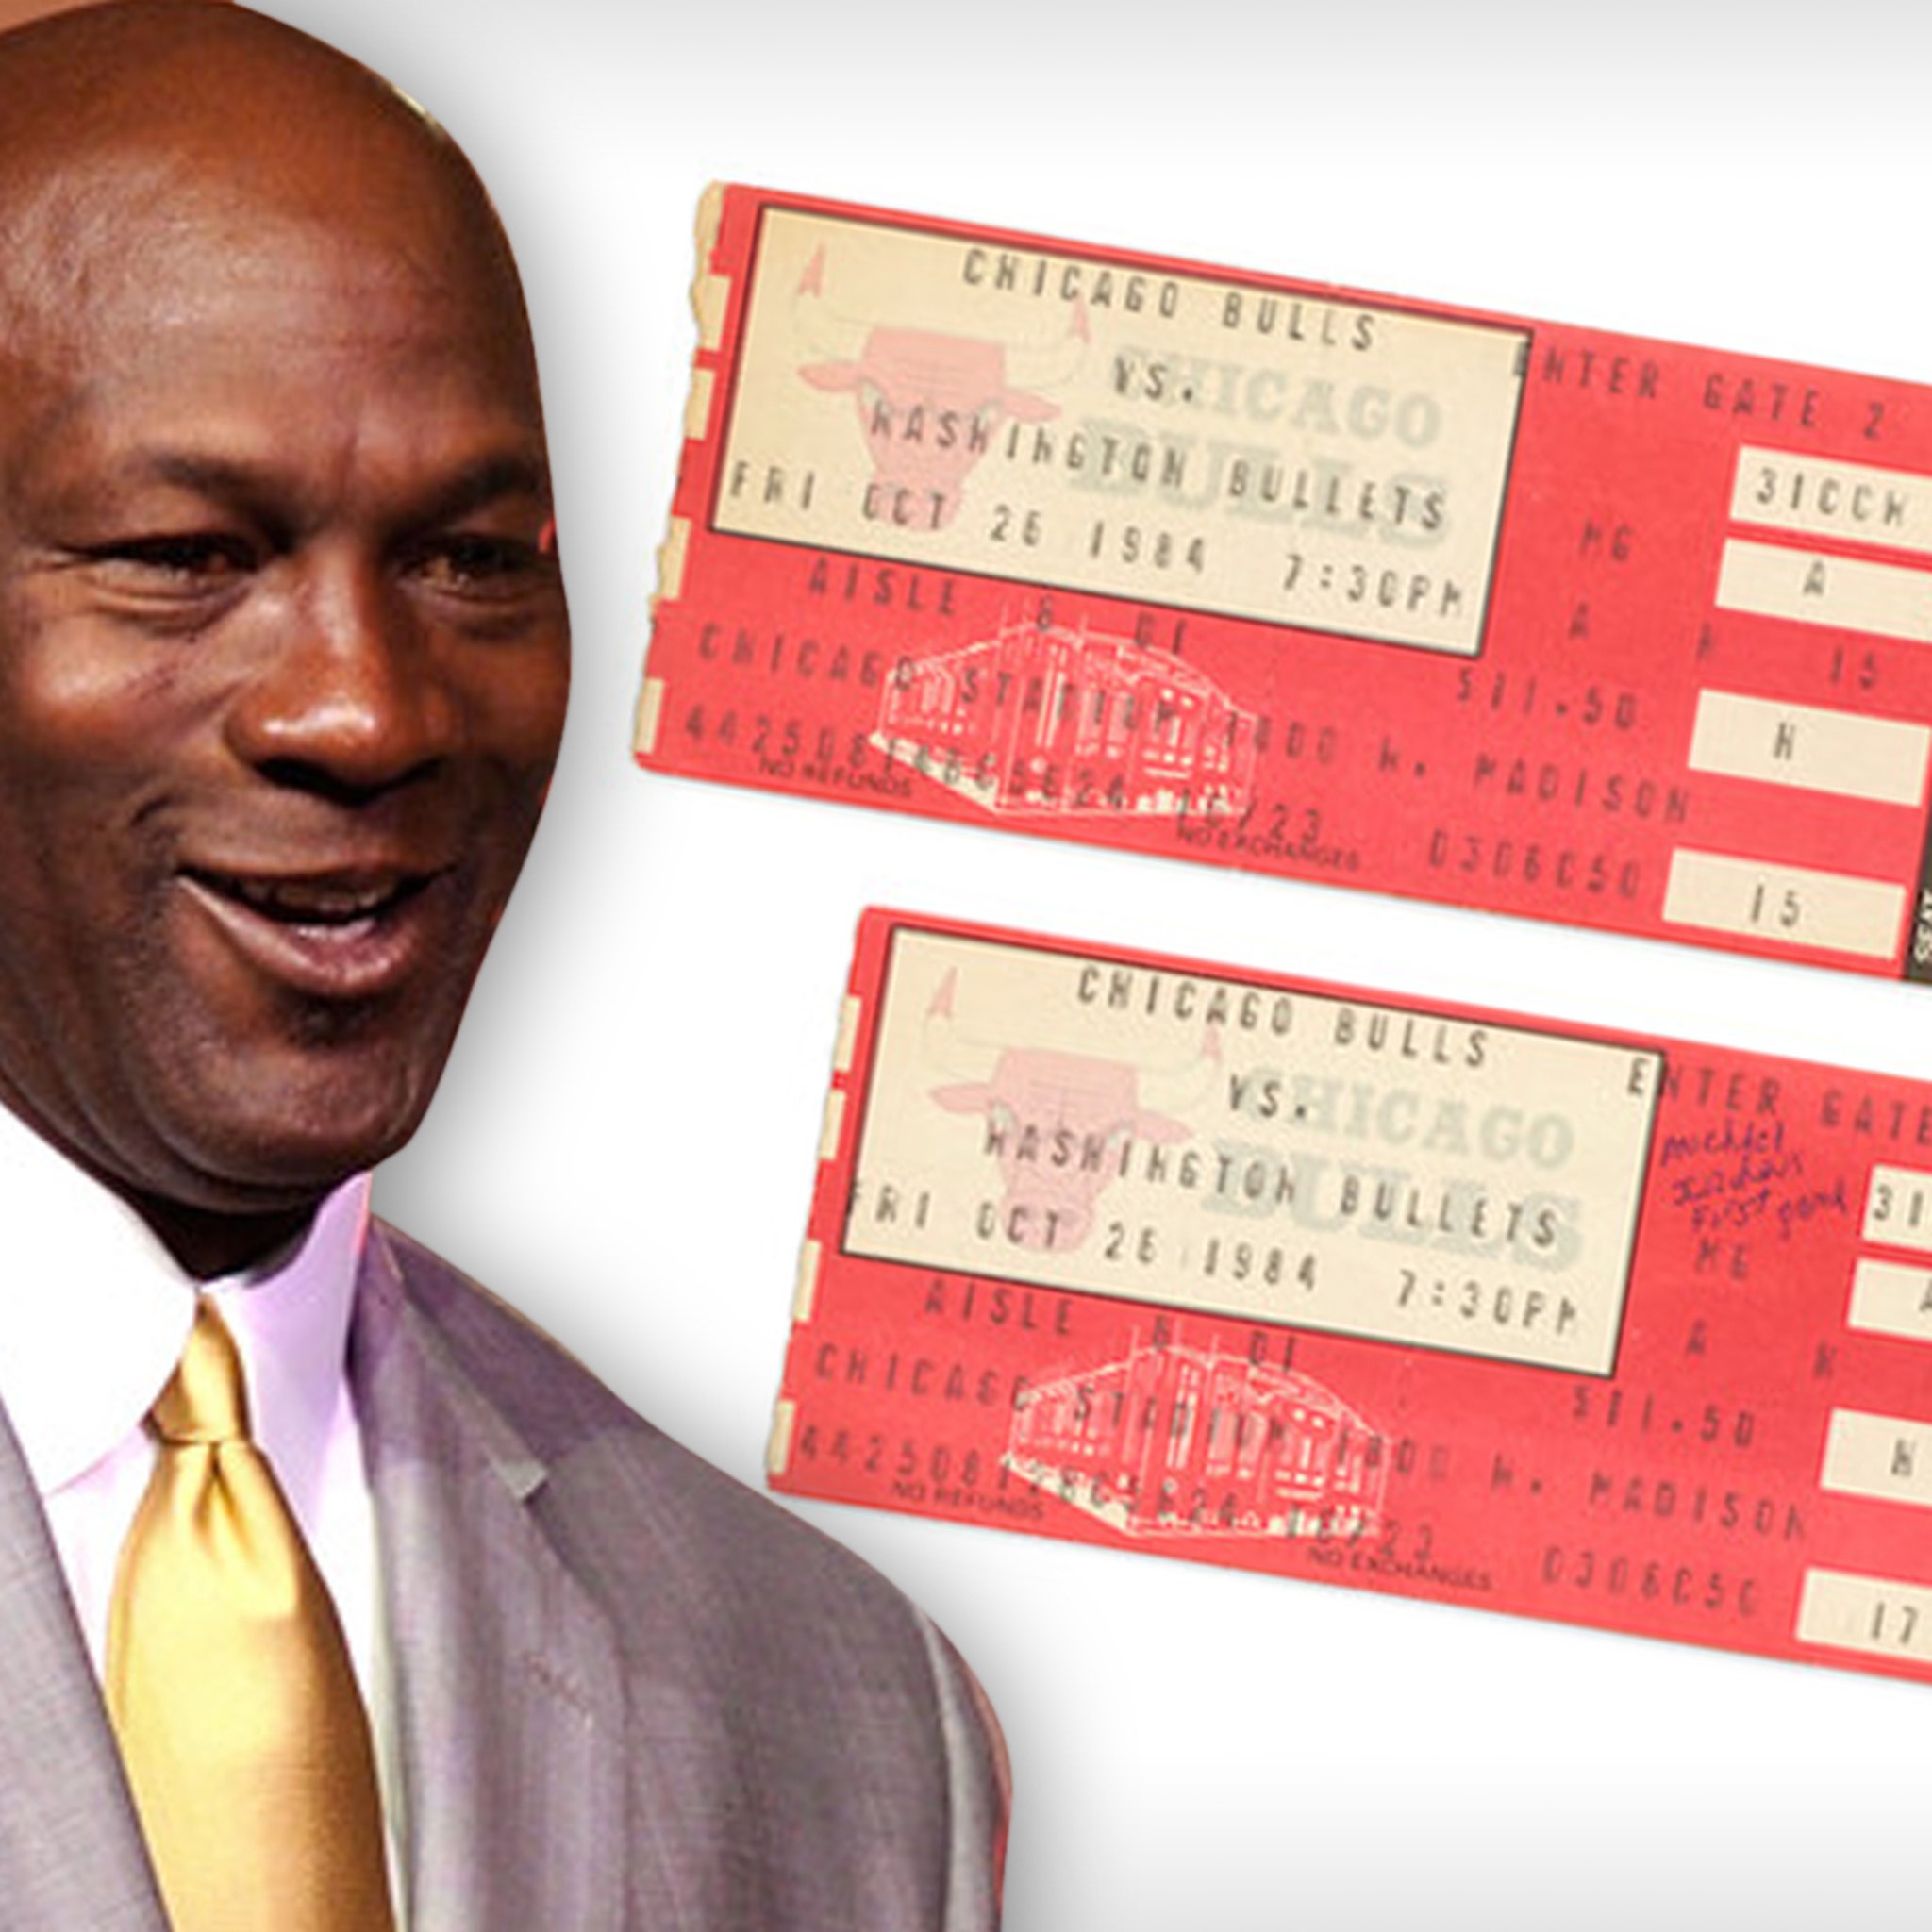 Ticket Stubs For Michael Jordan's NBA Debut Game Expected To Fetch